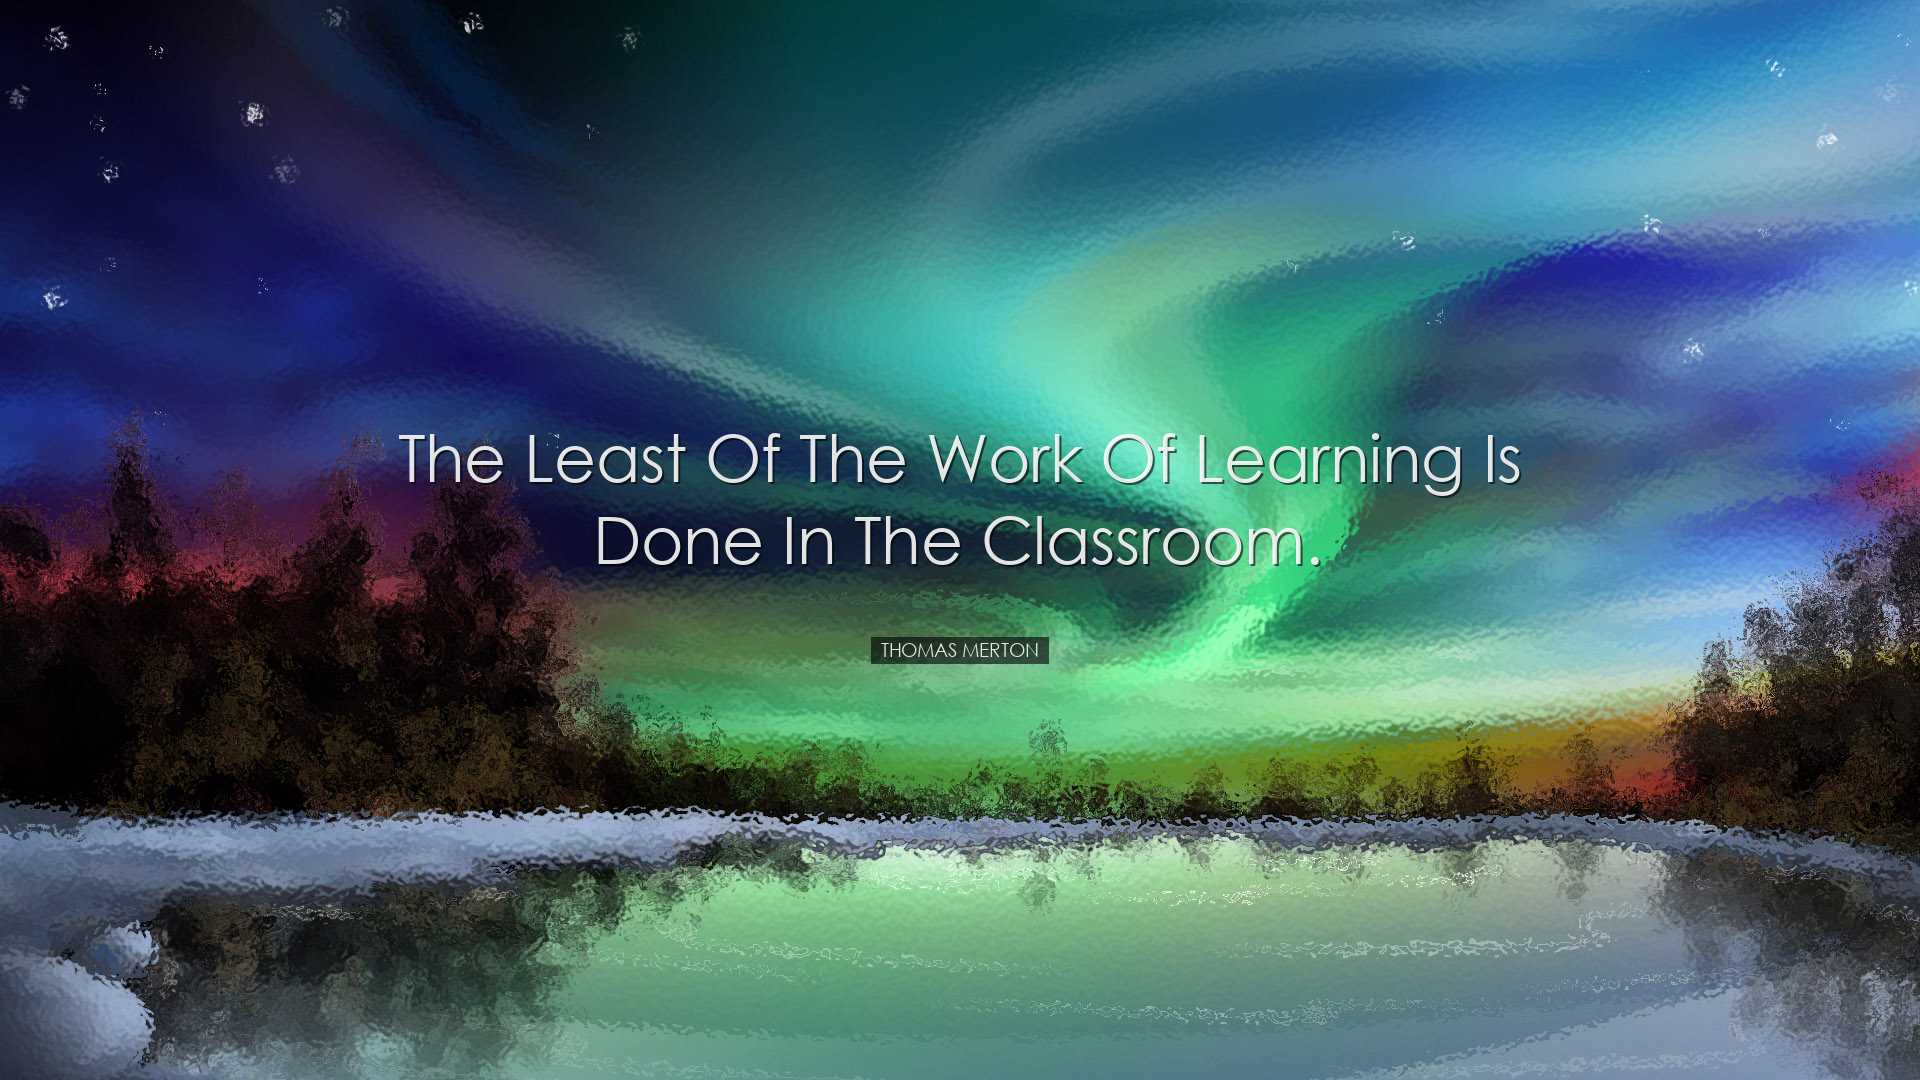 The least of the work of learning is done in the classroom. - Thom